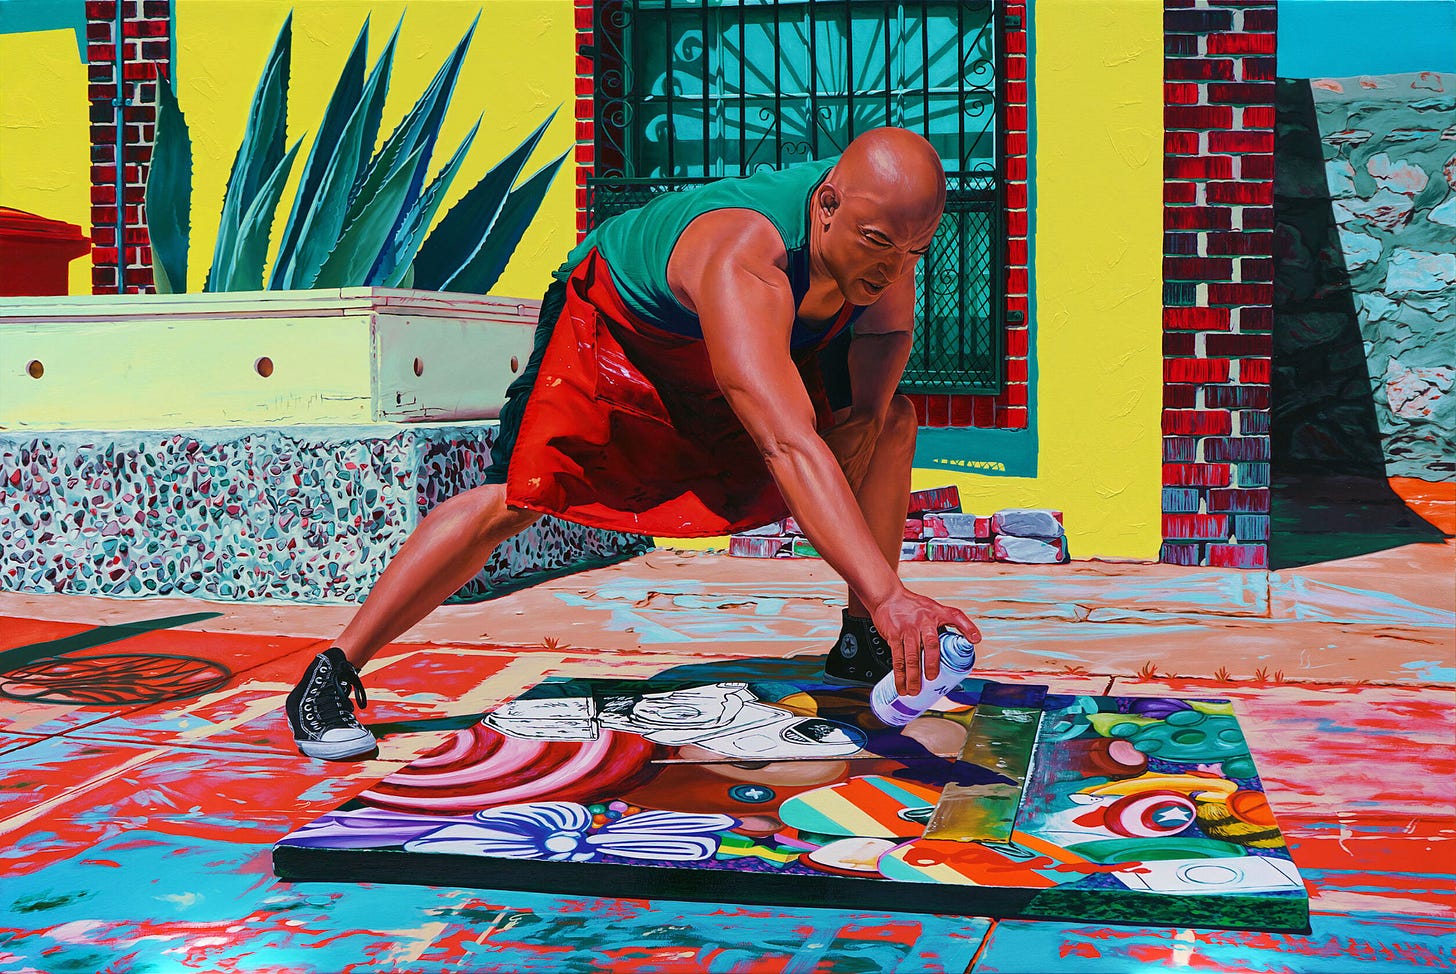 Oil on canvas, titled "En Pleno Día", depicting a bald figure – wearing a red apron and black Converse – bent over a canvas that is flat on the ground, spray painting an abstract design. Behind the figure is a yellow house and a large planter.